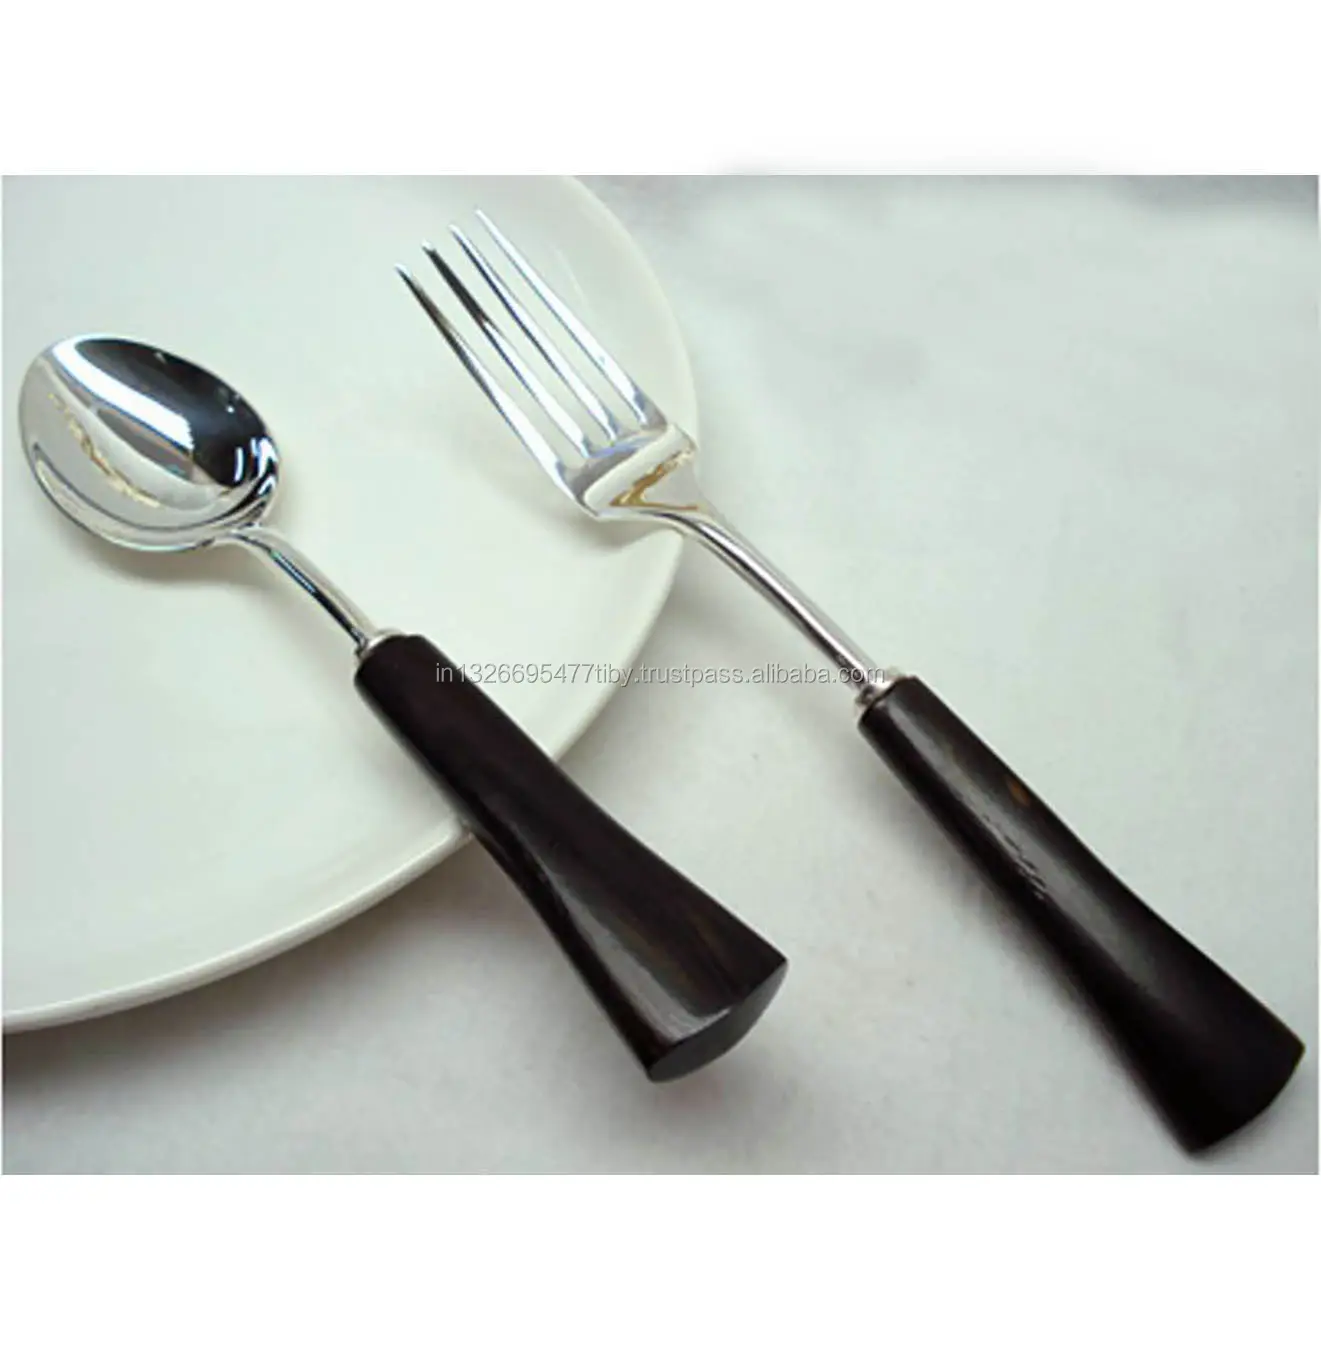 Metal Salad Server Set Of Two Pieces With Nickel Plating Finishing & Wooden Black Handle Simple Design Good Quality For Serving